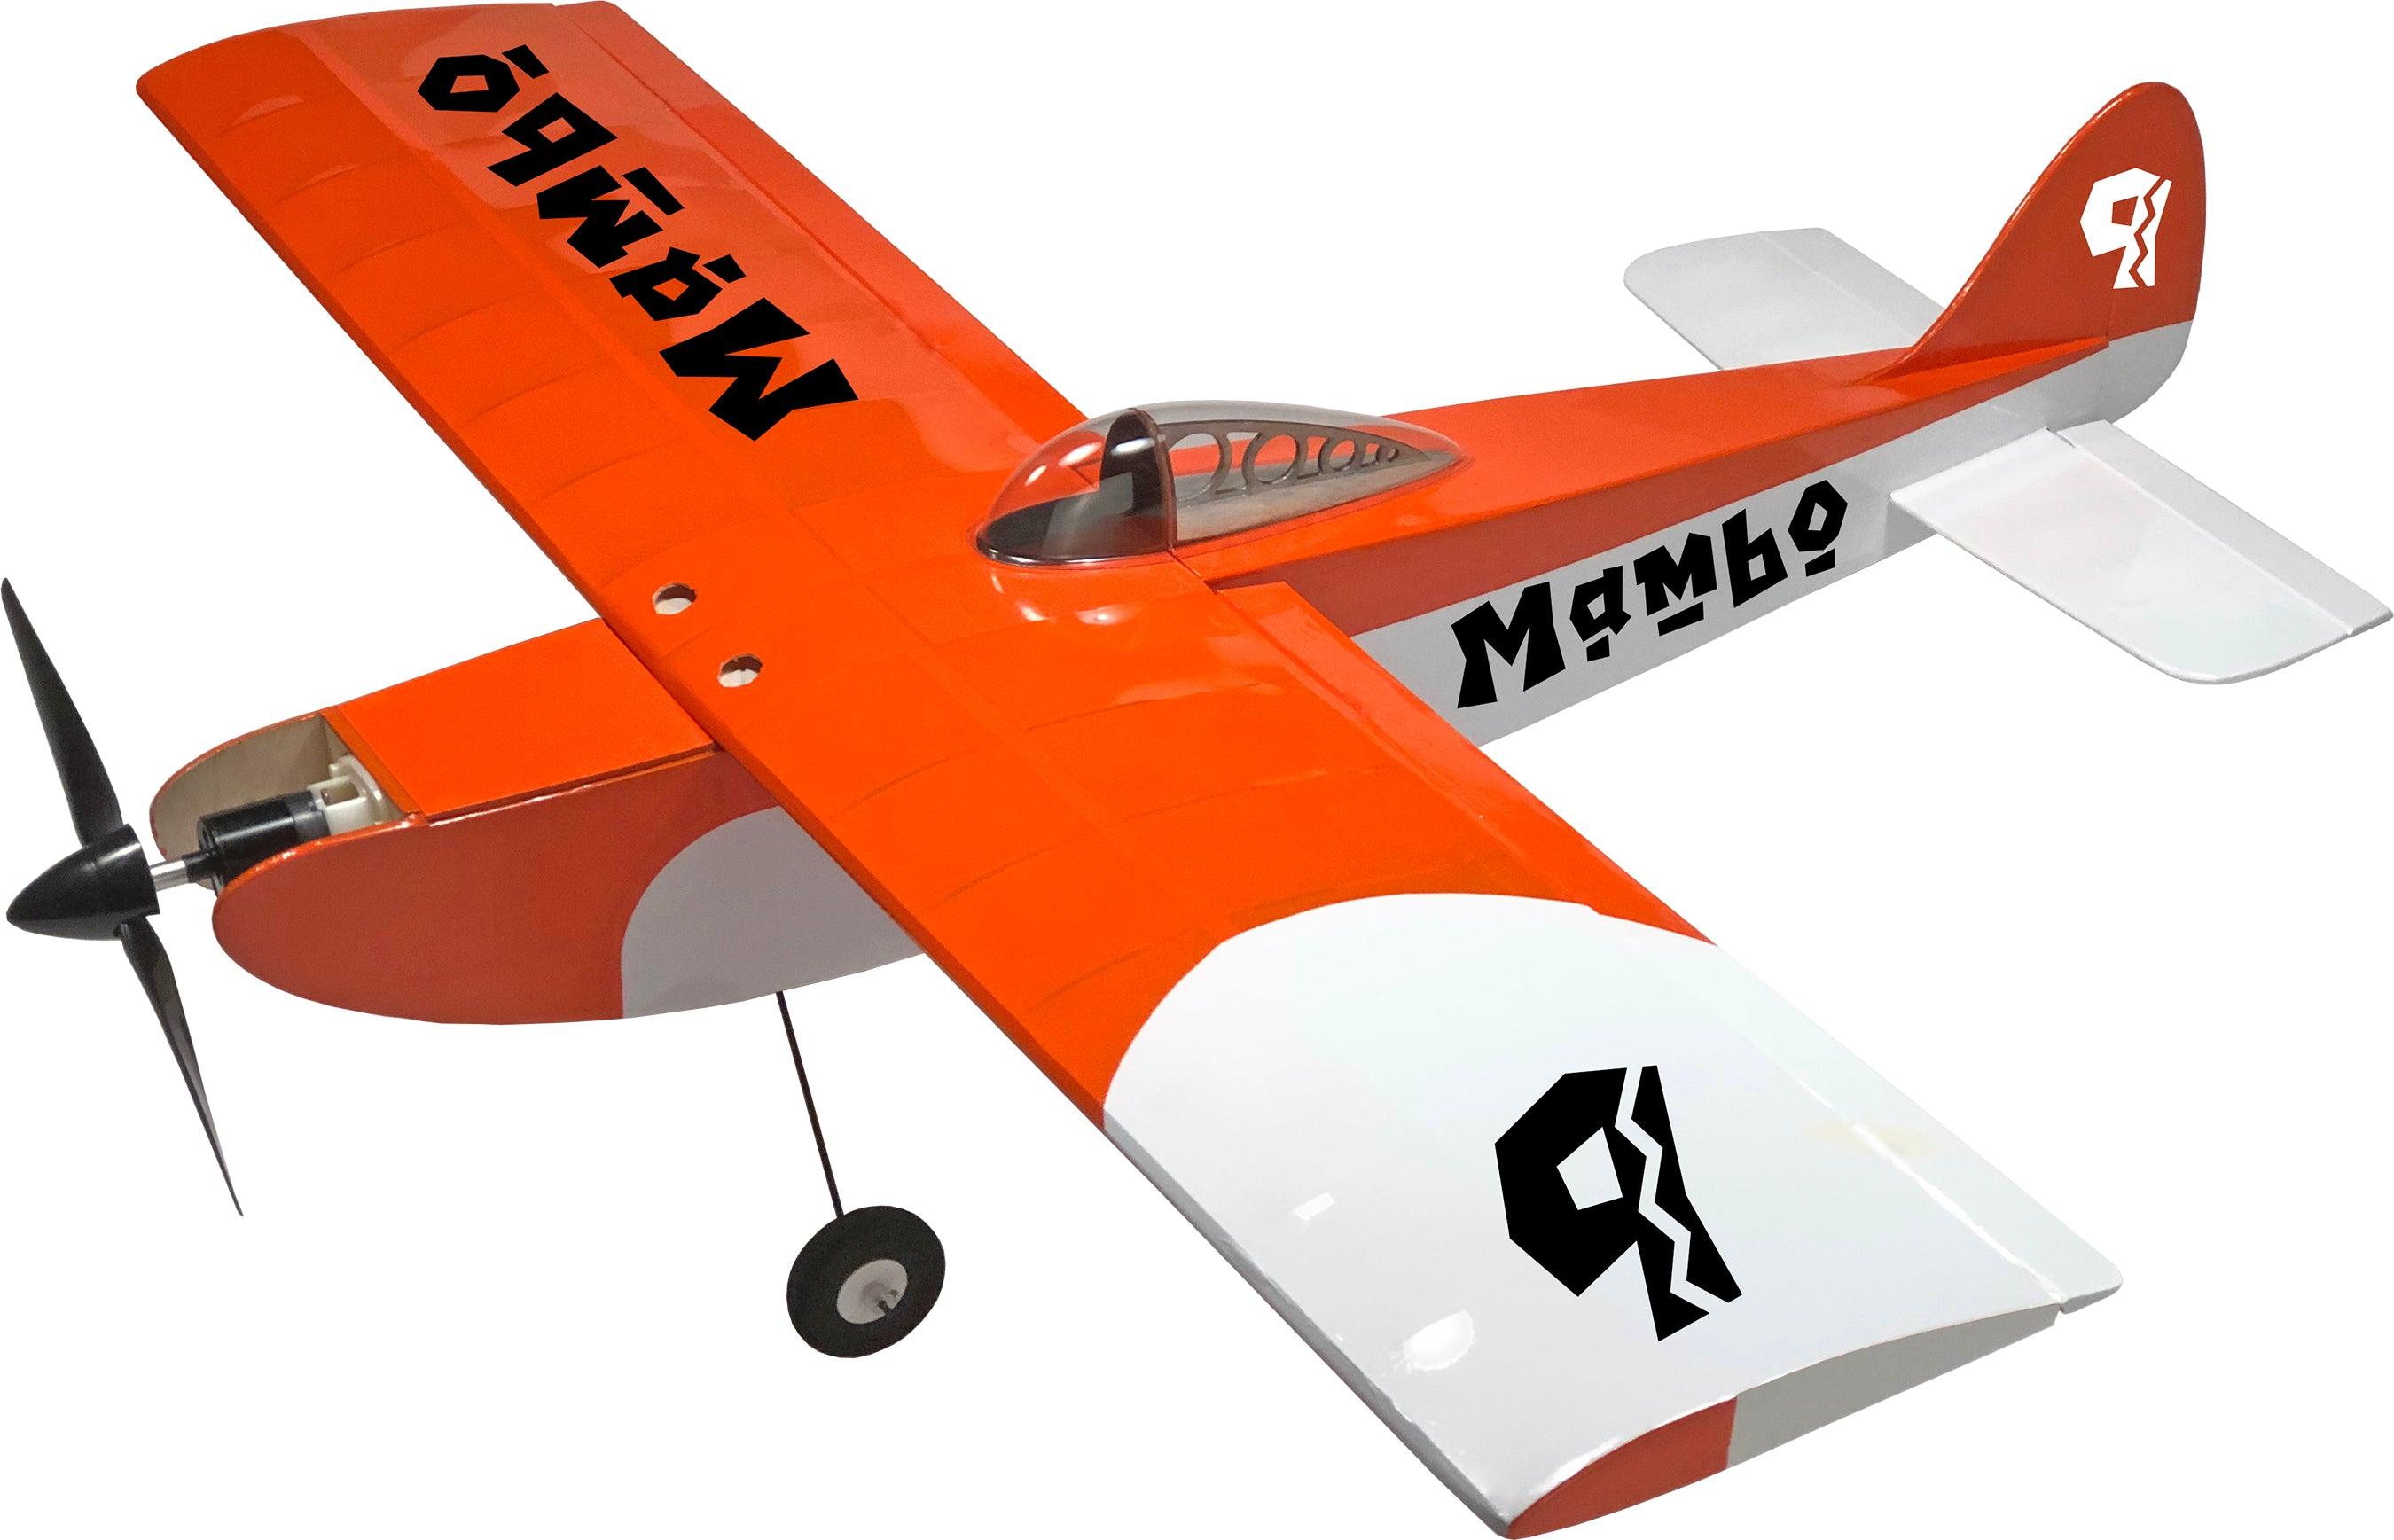 Vintage Rc Model Airplane Kits: Tips and Things to Consider When Shopping for Vintage RC Model Airplane Kits